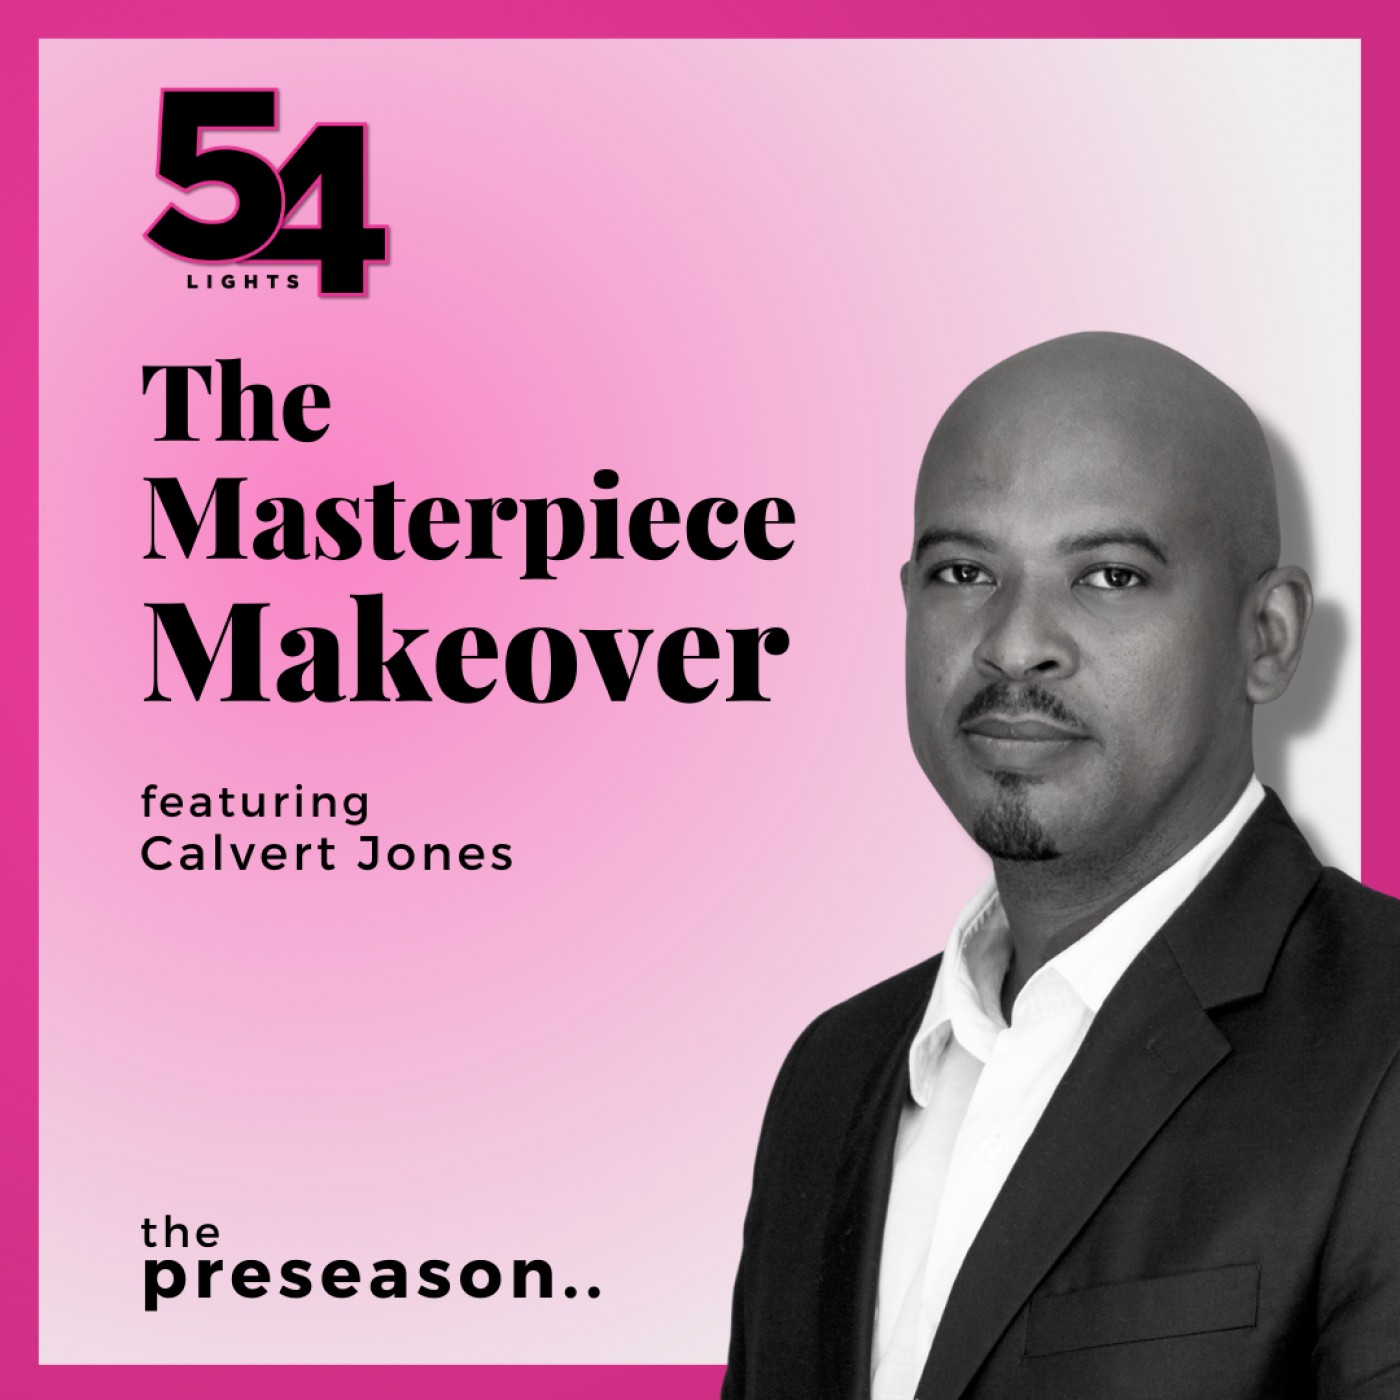 The Masterpiece Makeover